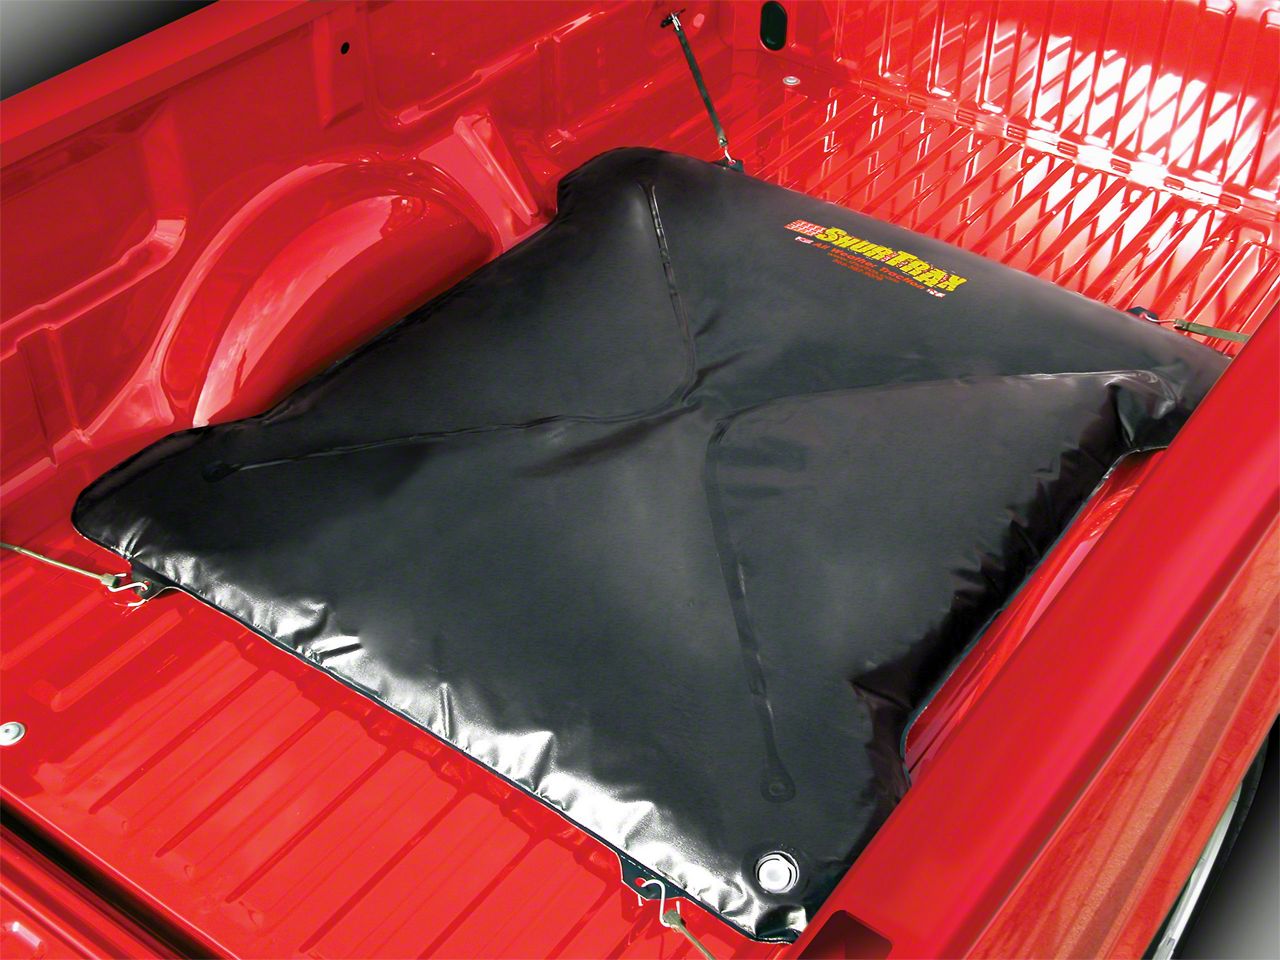 F150 Bed Liners & Bed Mats 1997-2003